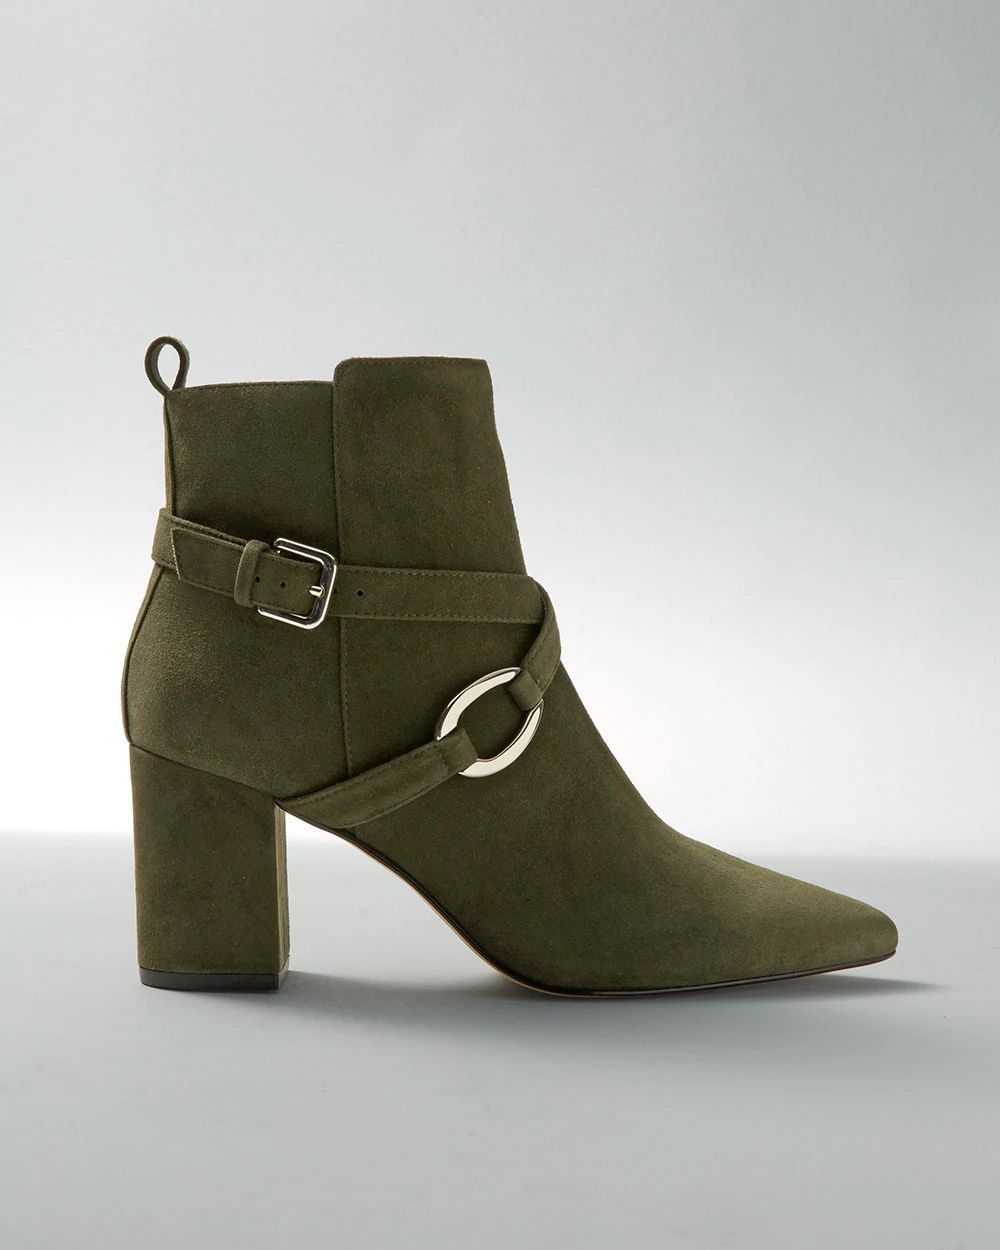 Devon Side Buckle Bootie click to view larger image.